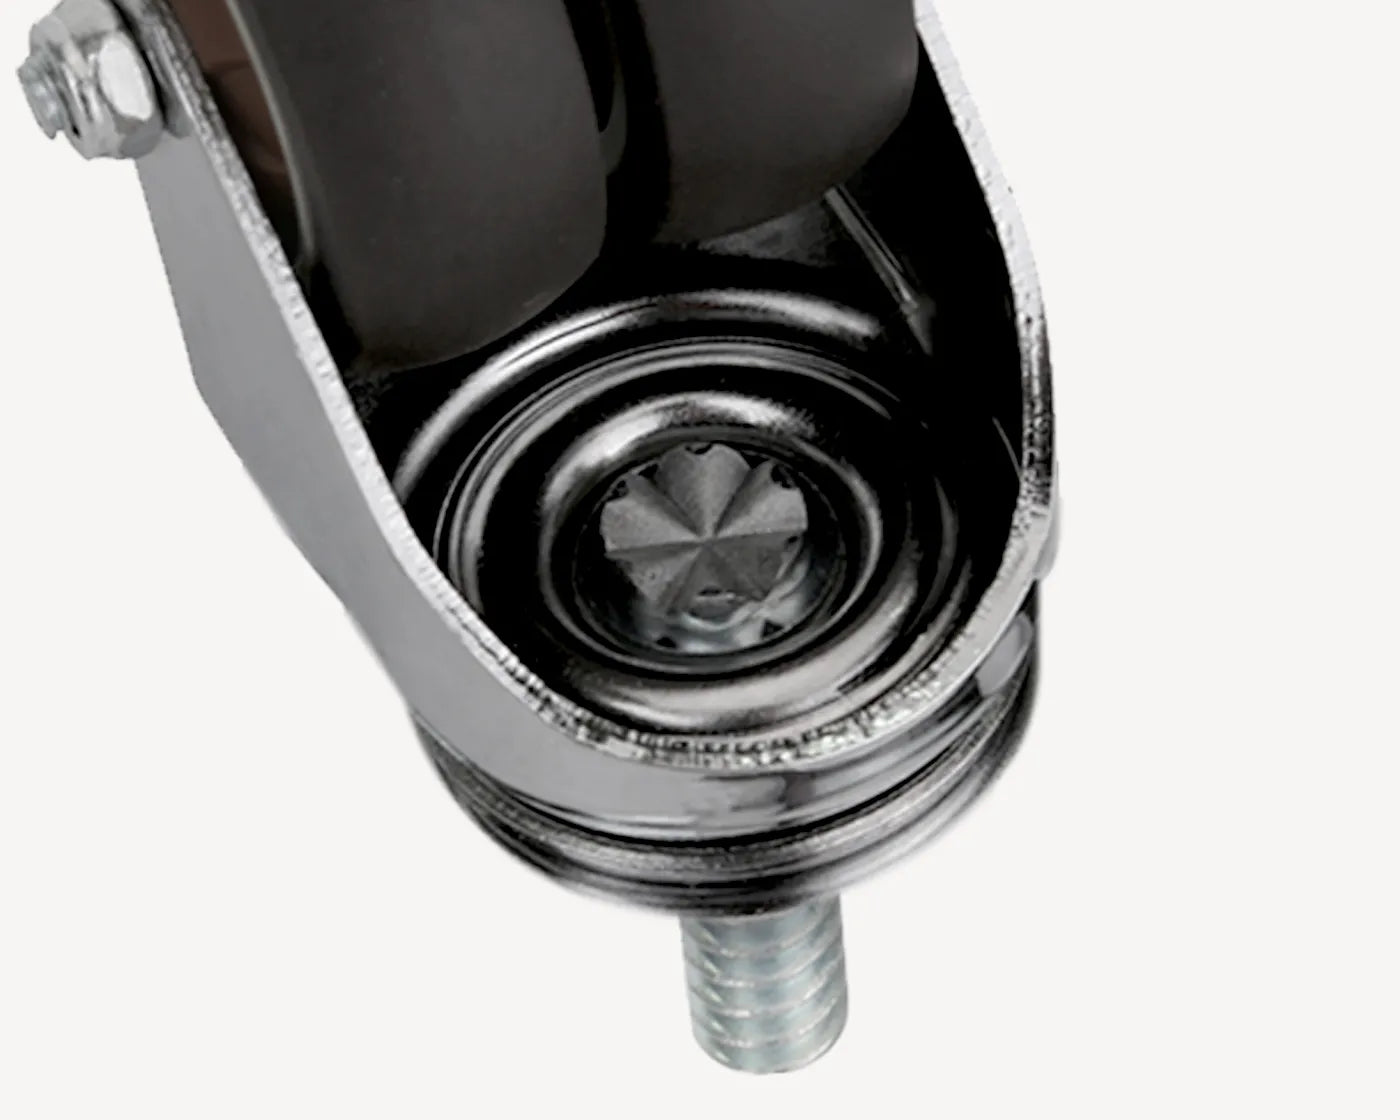 Close-up view of the inner mechanism of a caster wheel, showcasing the detailed construction and sturdy metal bolt.